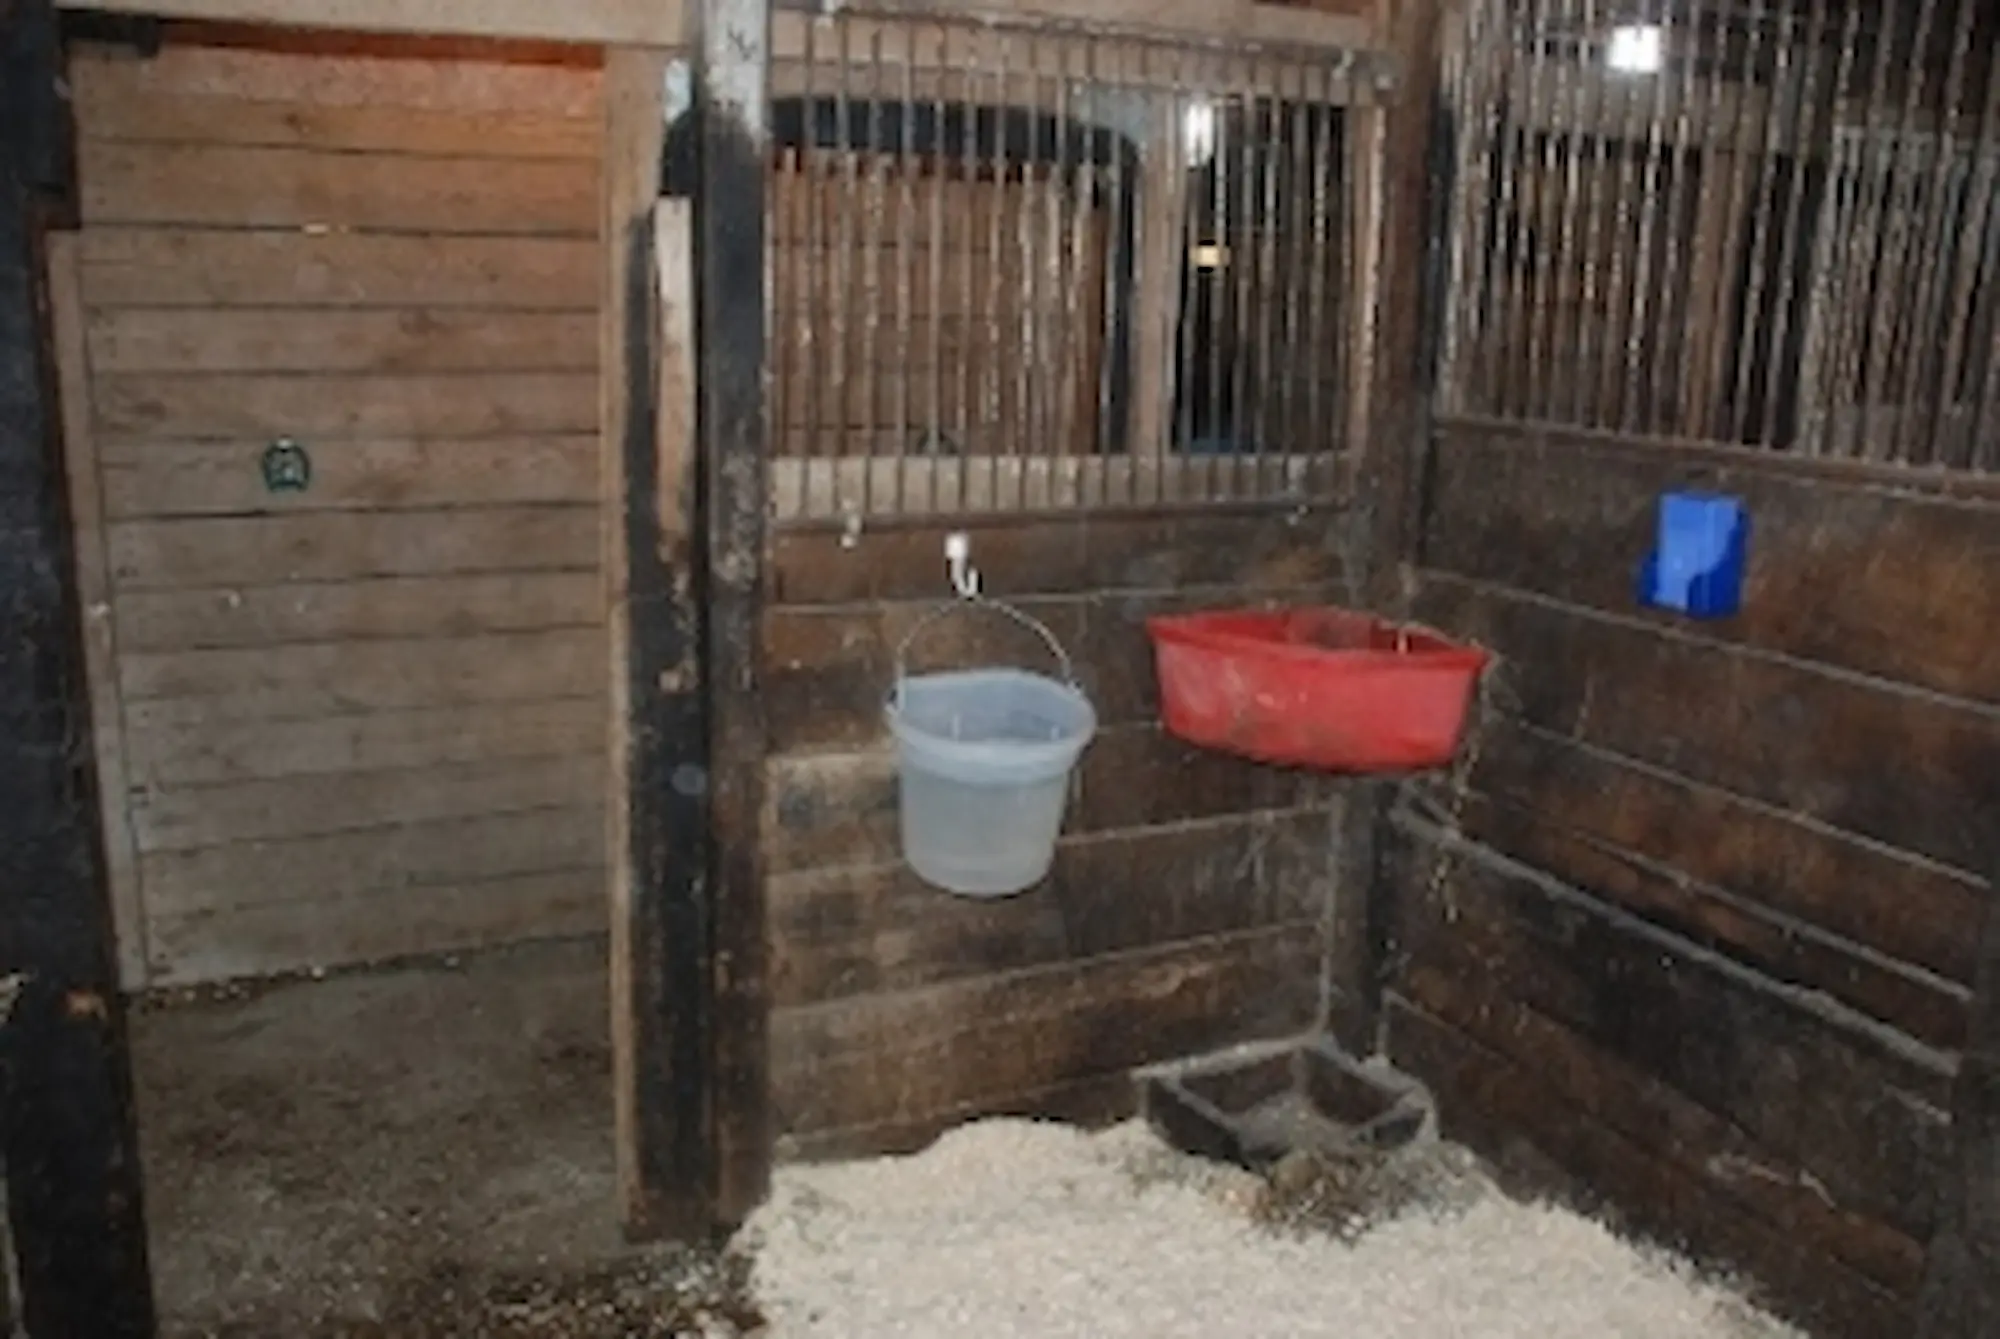 The inside of a stall